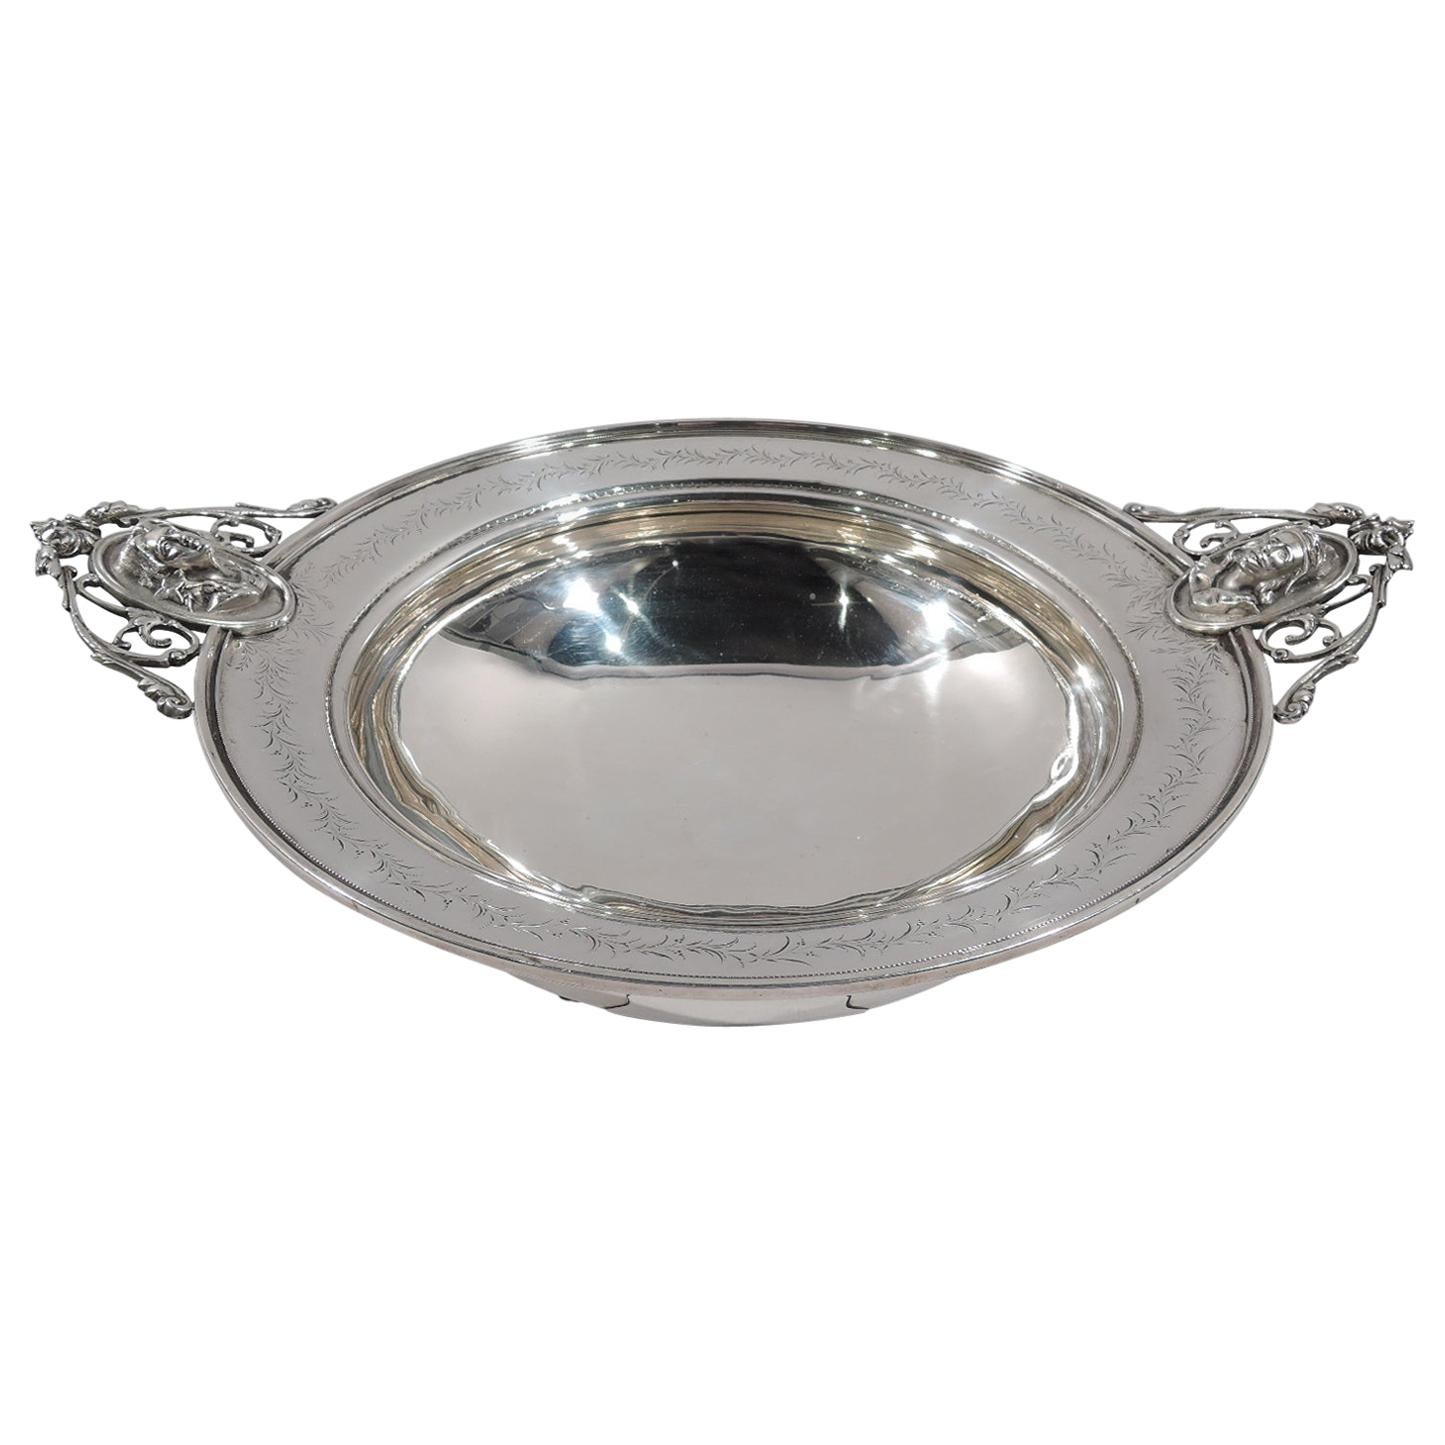 American Classical Sterling Silver Medallion Centerpiece Bowl